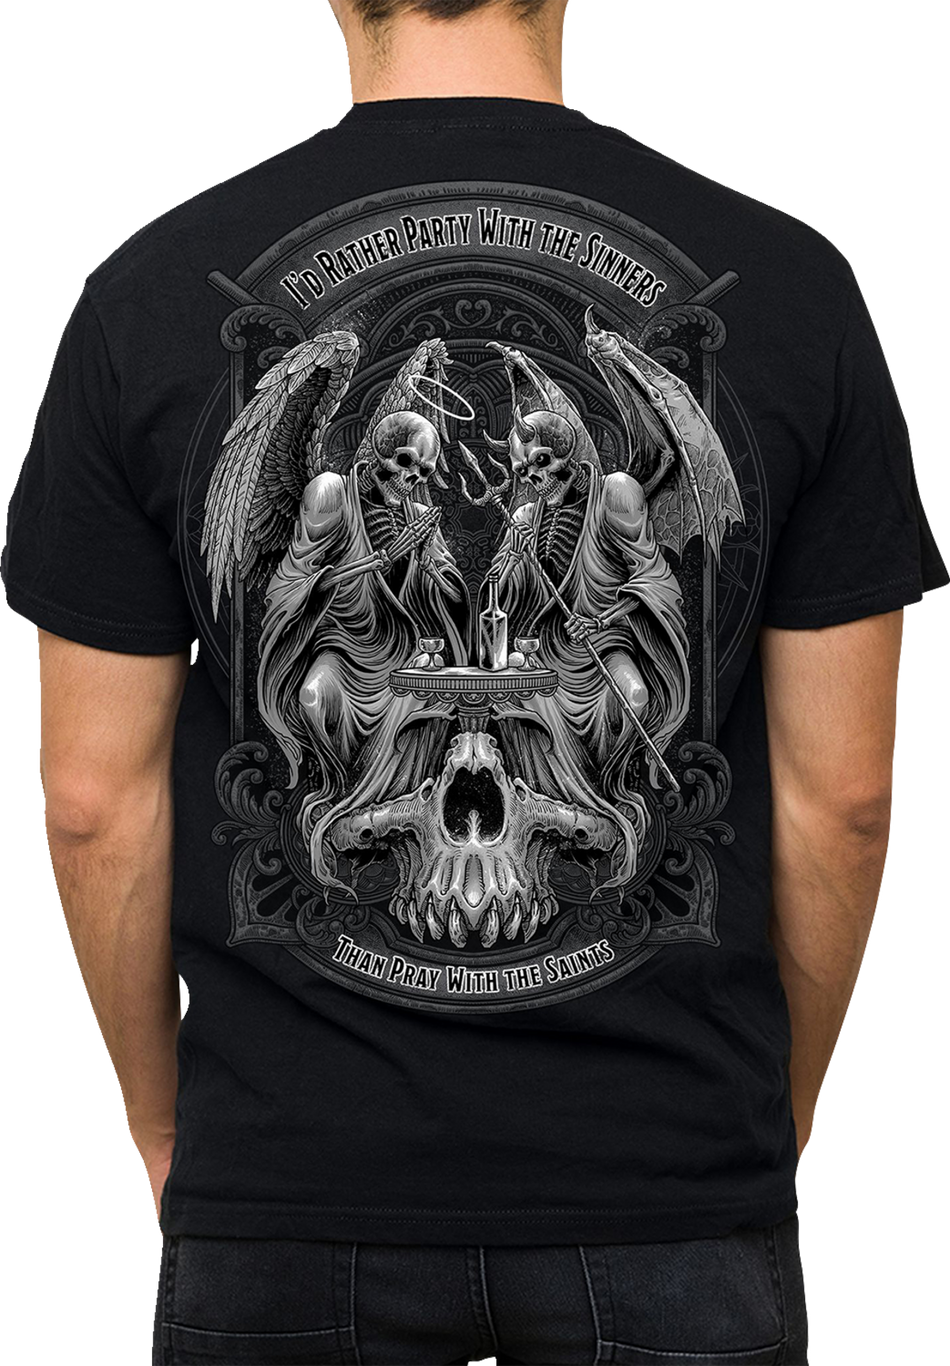 LETHAL THREAT Party with the Sinners T-Shirt - Black - Medium LT20905M